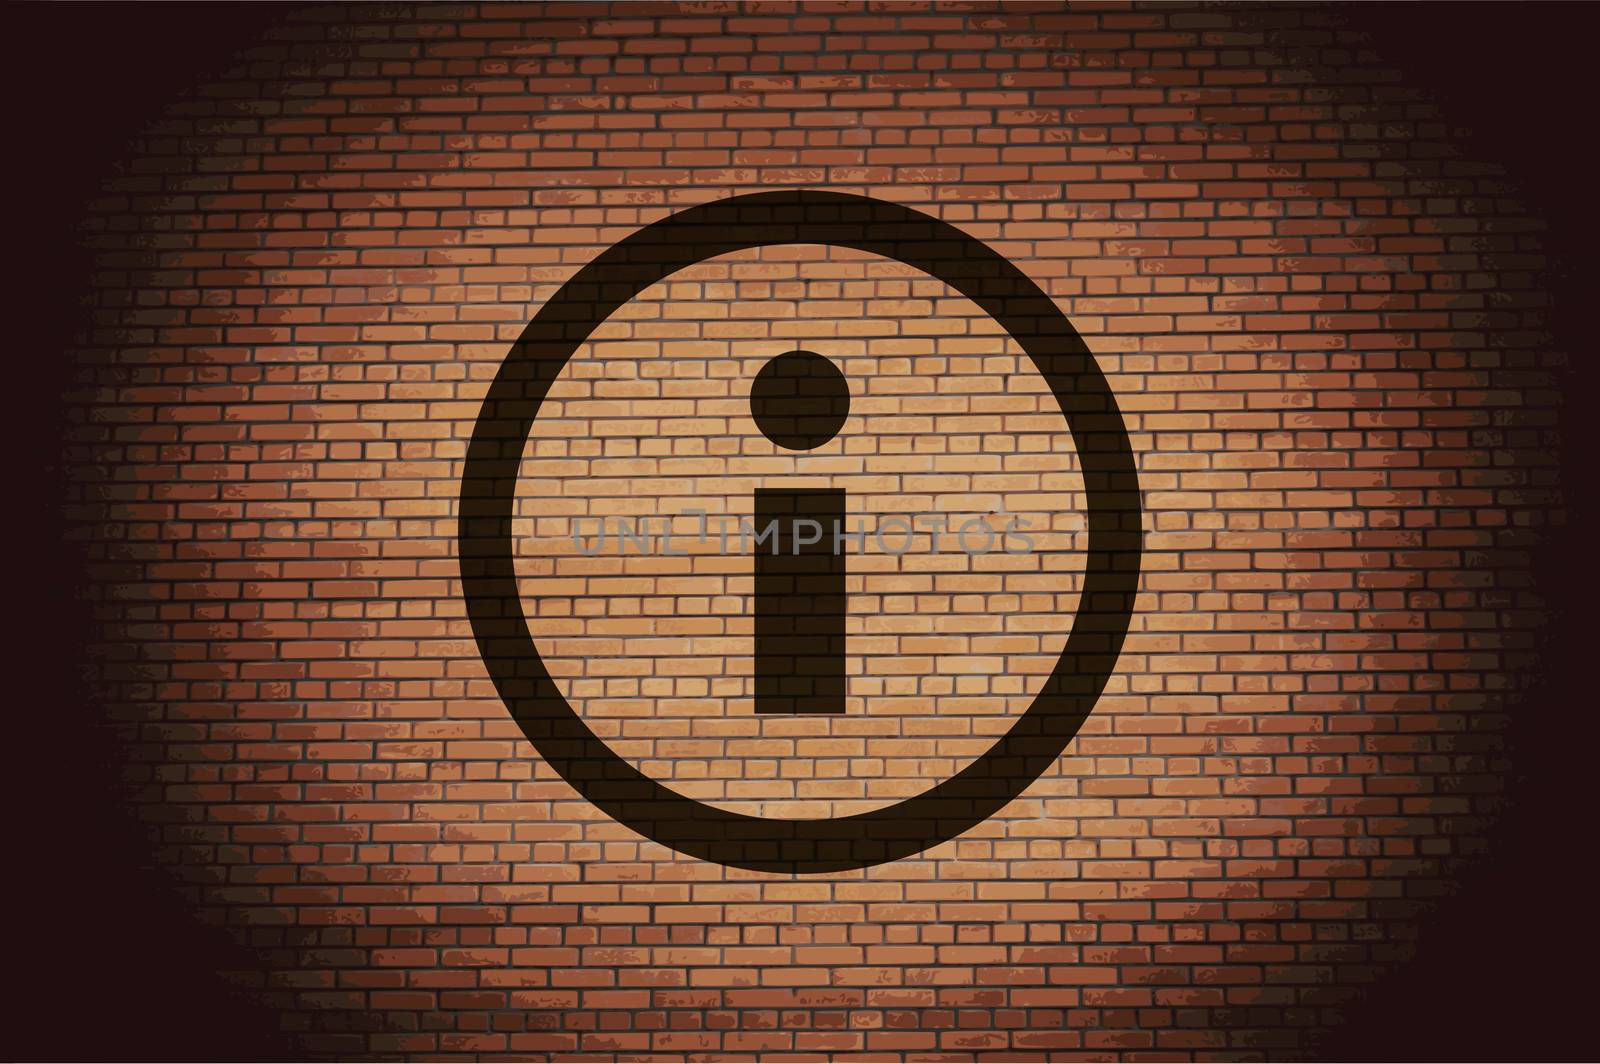 Information sign icon flat design with abstract background.